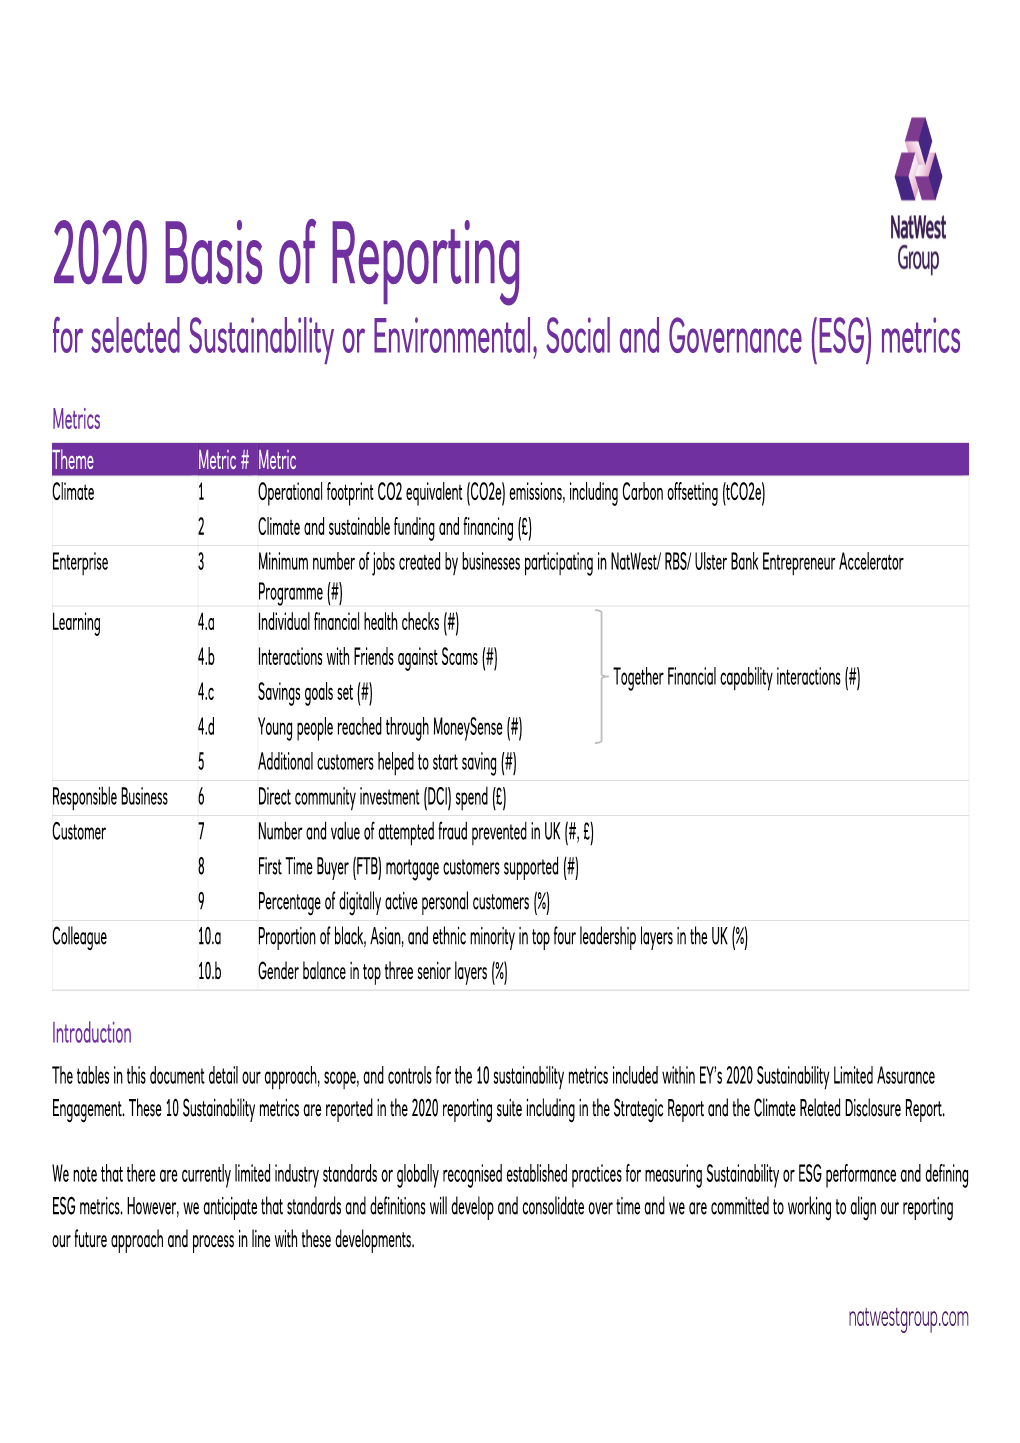 2020 Basis of Reporting for Selected Sustainability Or Environmental, Social and Governance (ESG) Metrics